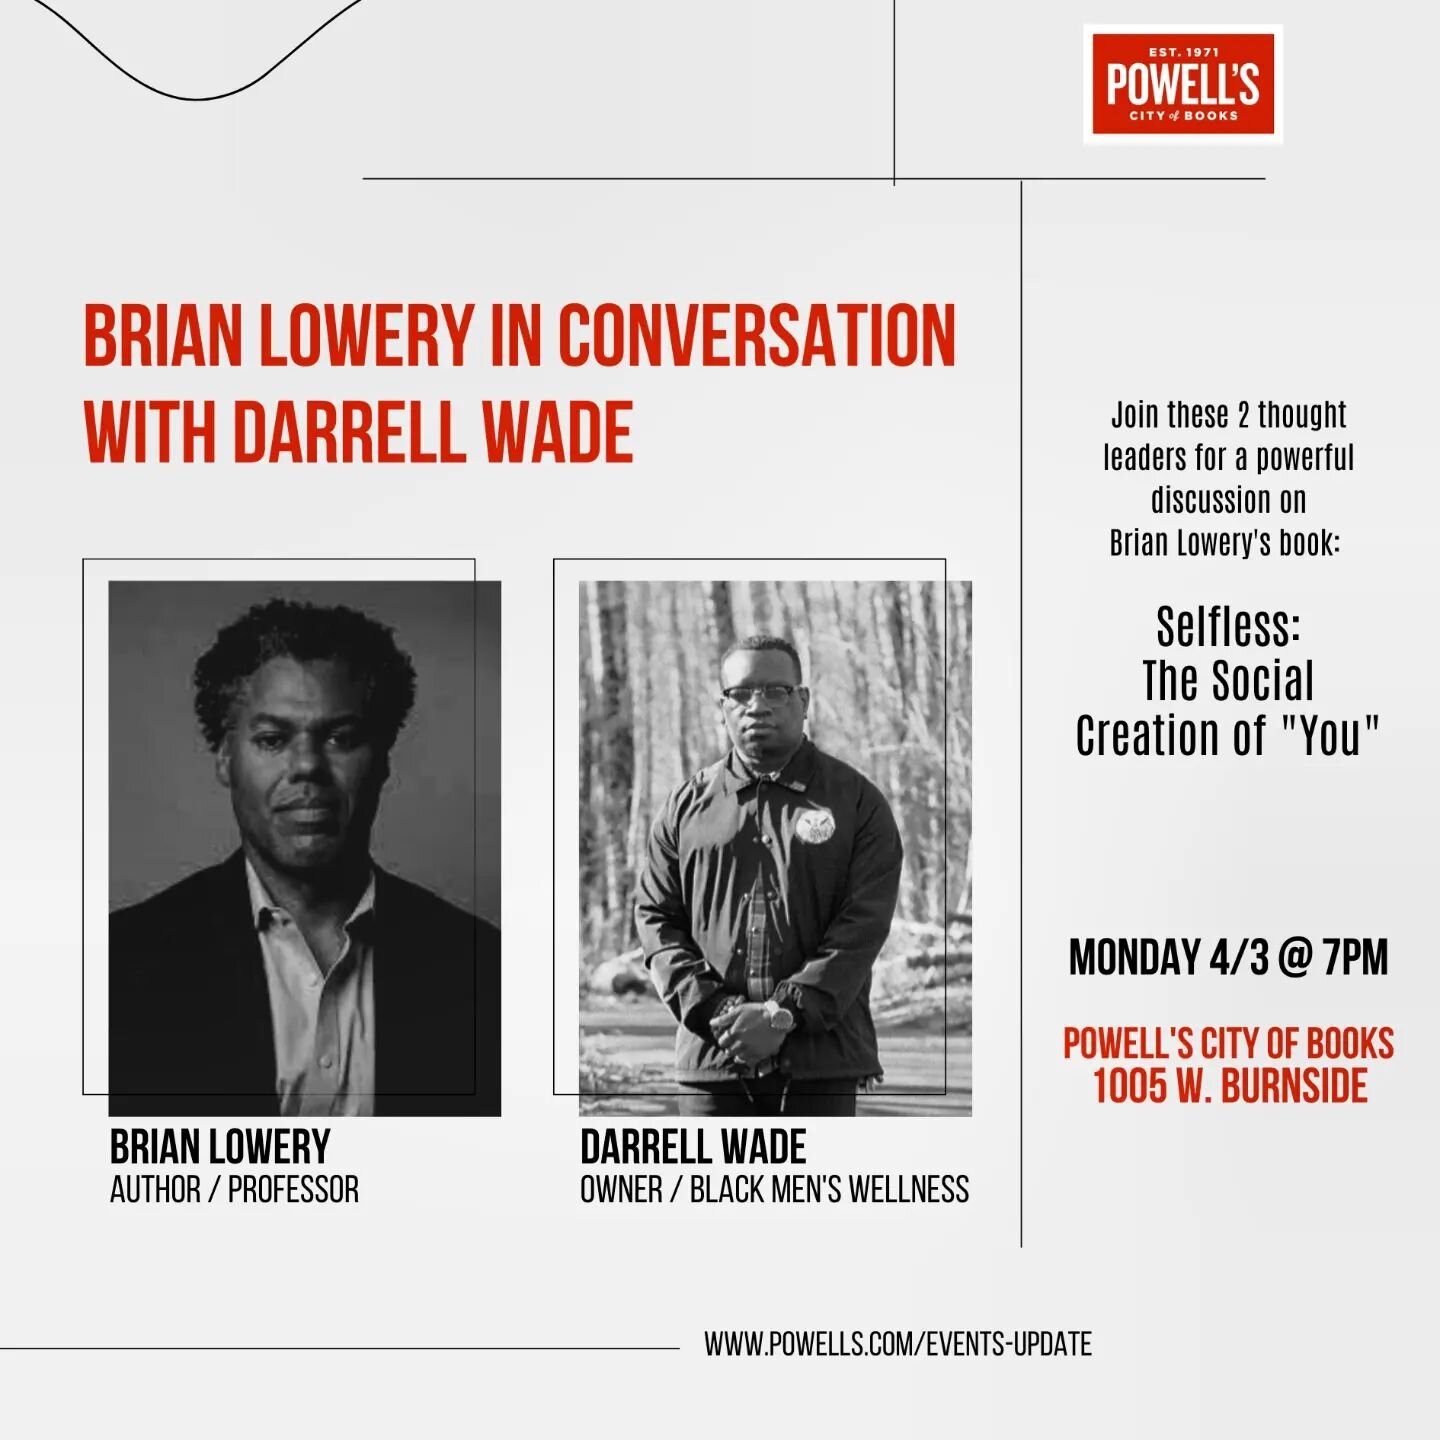 This Monday, 4/3 - Black Men's Wellness Founder &amp; Director, Darrell Wade, will be joining author and professor Brian Lowery, PhD,  for a discussion on Lowery's new book, &quot;Selfless: The Social Creation of YOU&quot;.

&quot;Social psychologist